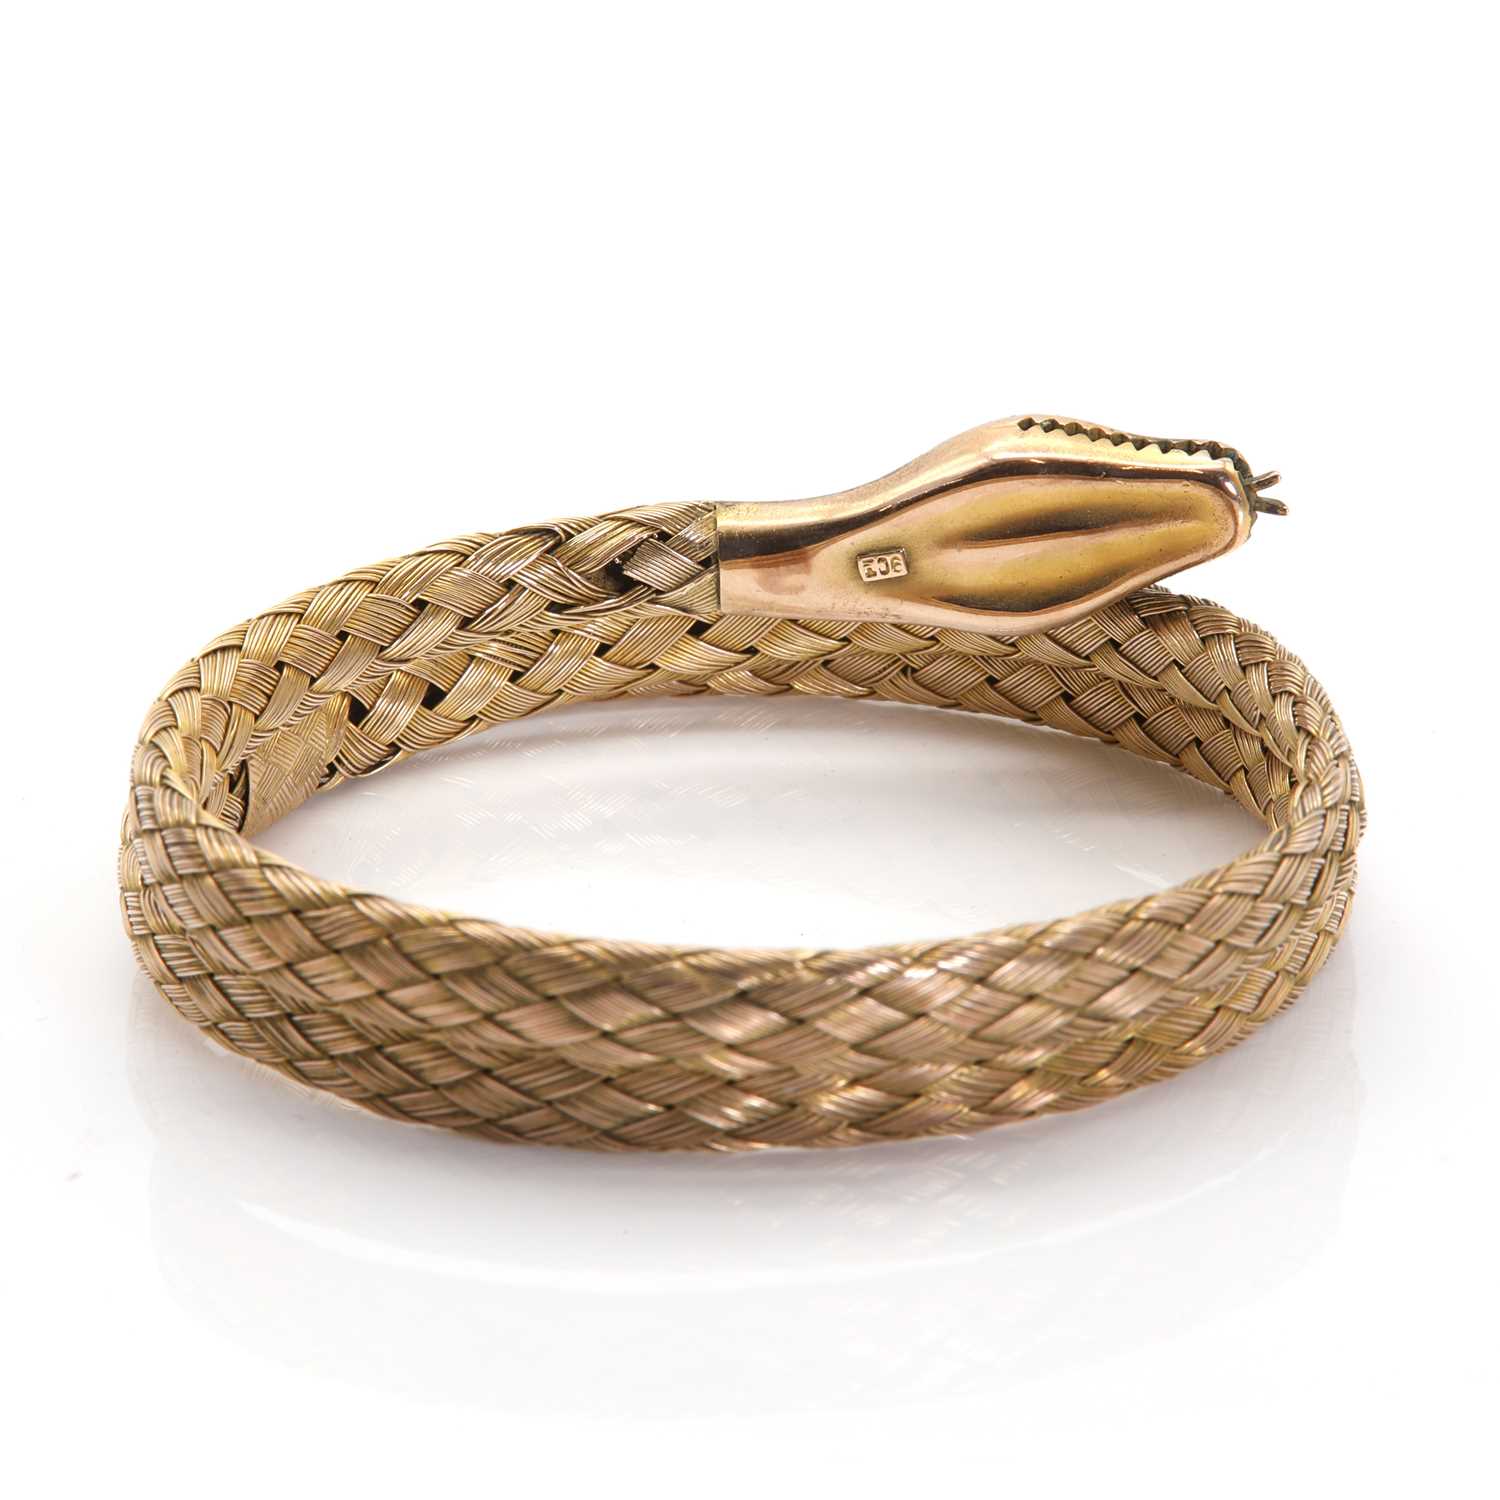 A gold coiled snake flexible bangle, - Image 2 of 3